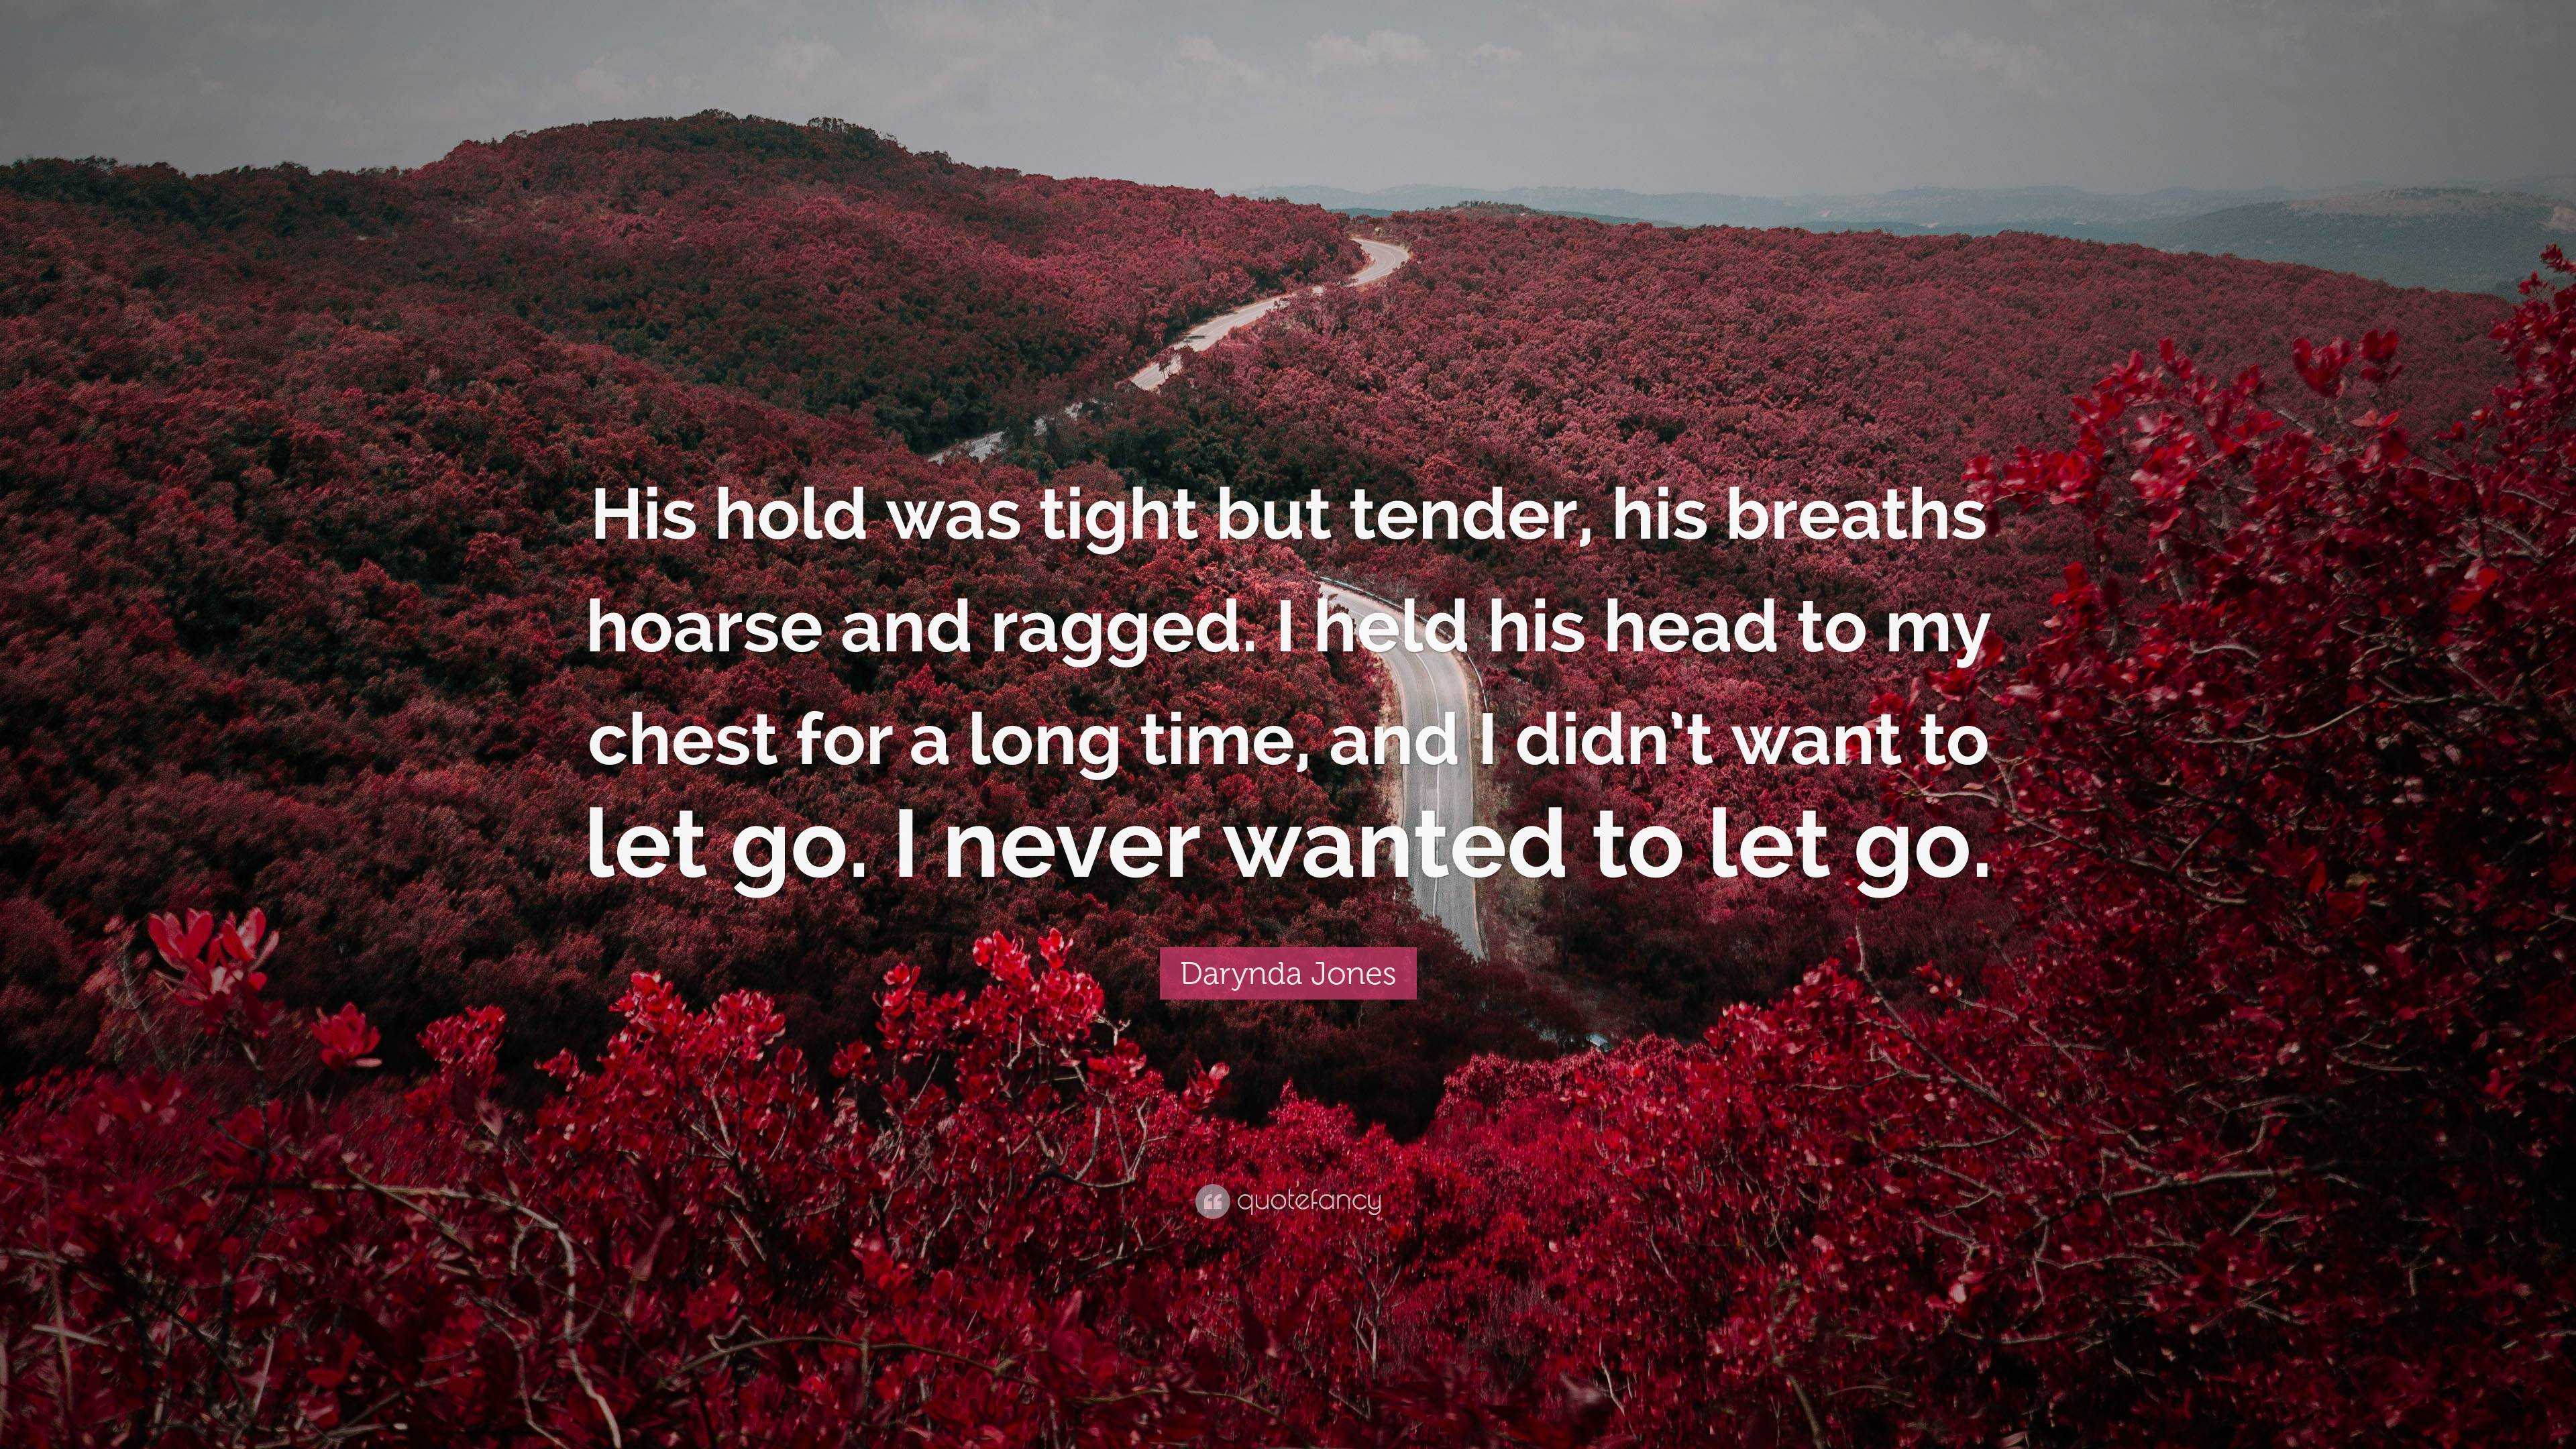 Darynda Jones Quote: “His hold was tight but tender, his breaths